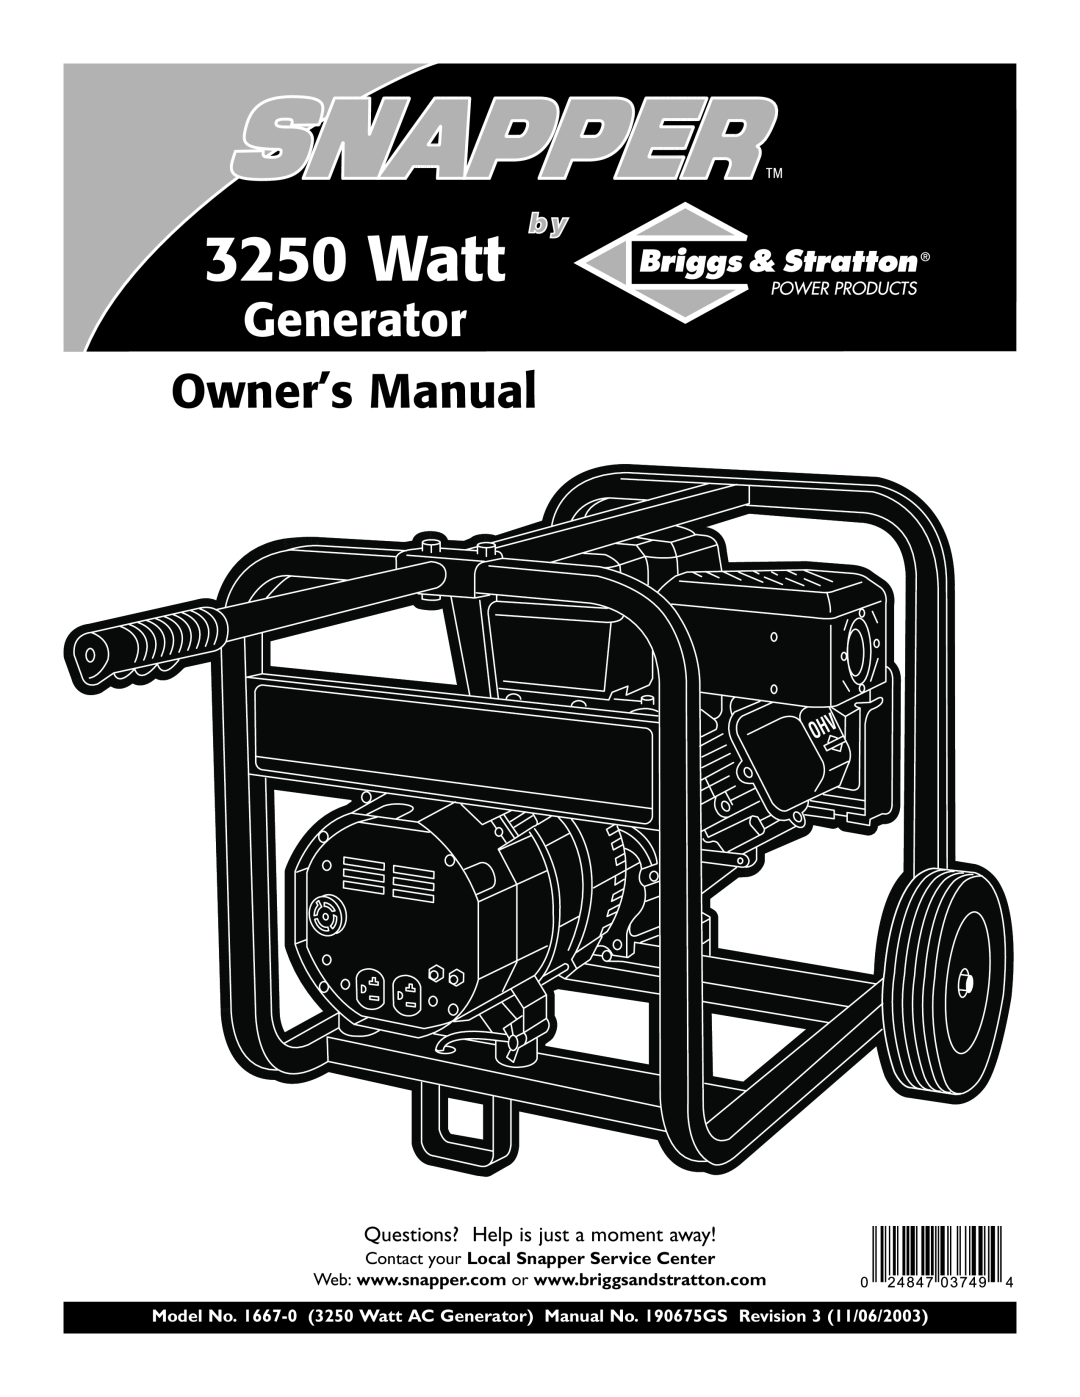 Snapper 3250 owner manual Questions? Help is just a moment away, Contact your Local Snapper Service Center, Watt 